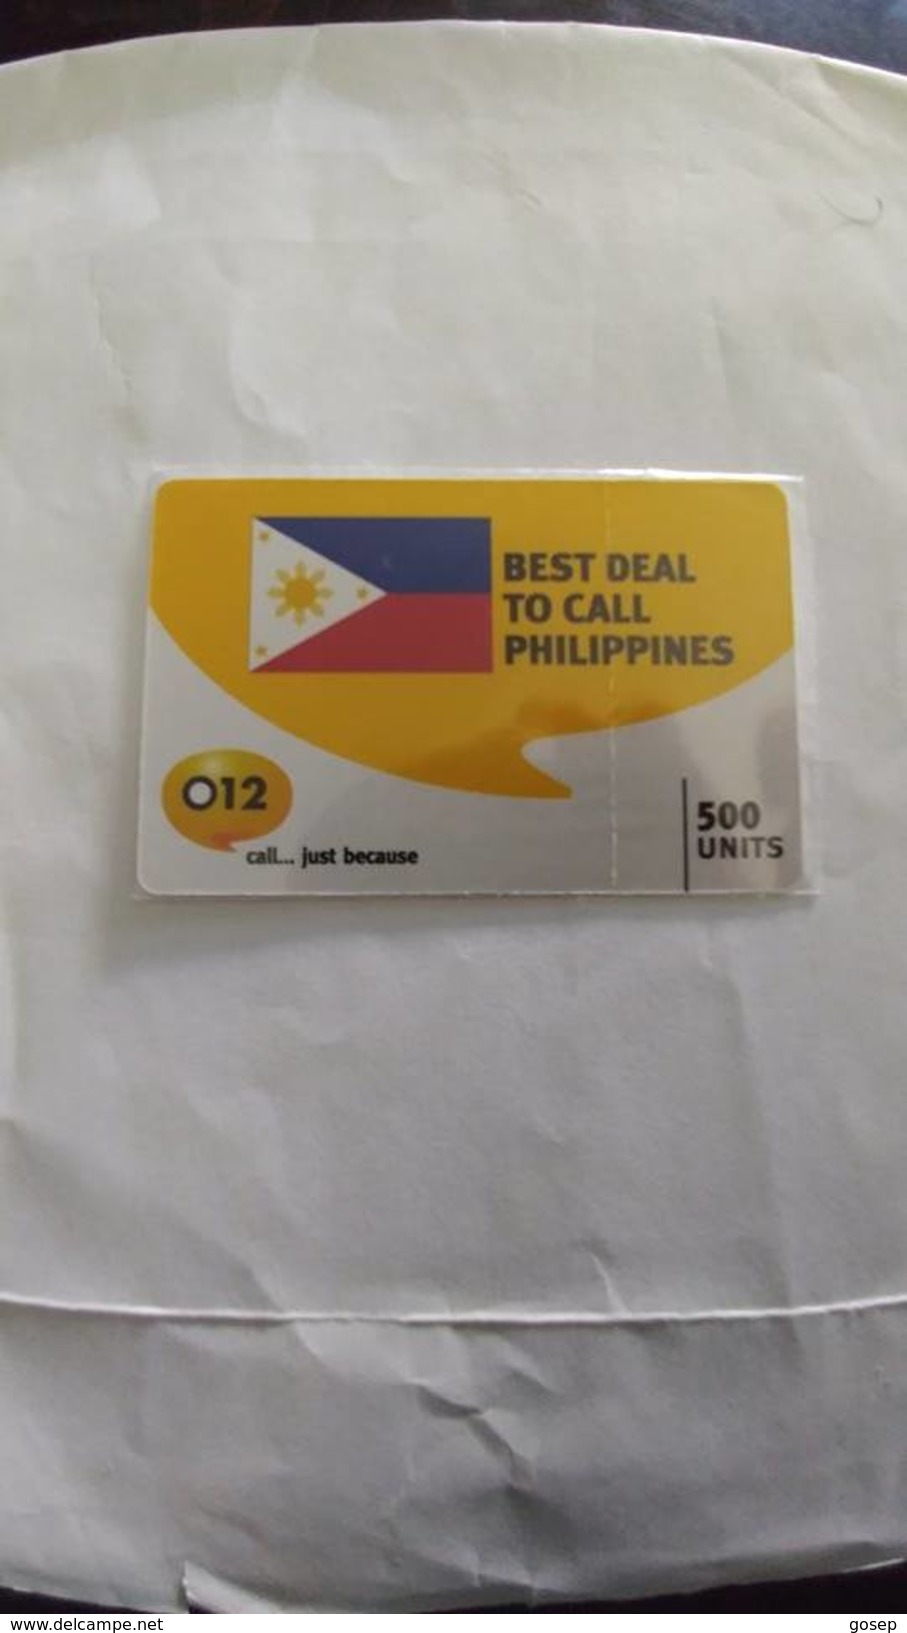 Israel-best Deal To Call Philippines-(4)-flag-(500units)-(012call Just Because)-(5.3.2008)-mint Card - Filipinas